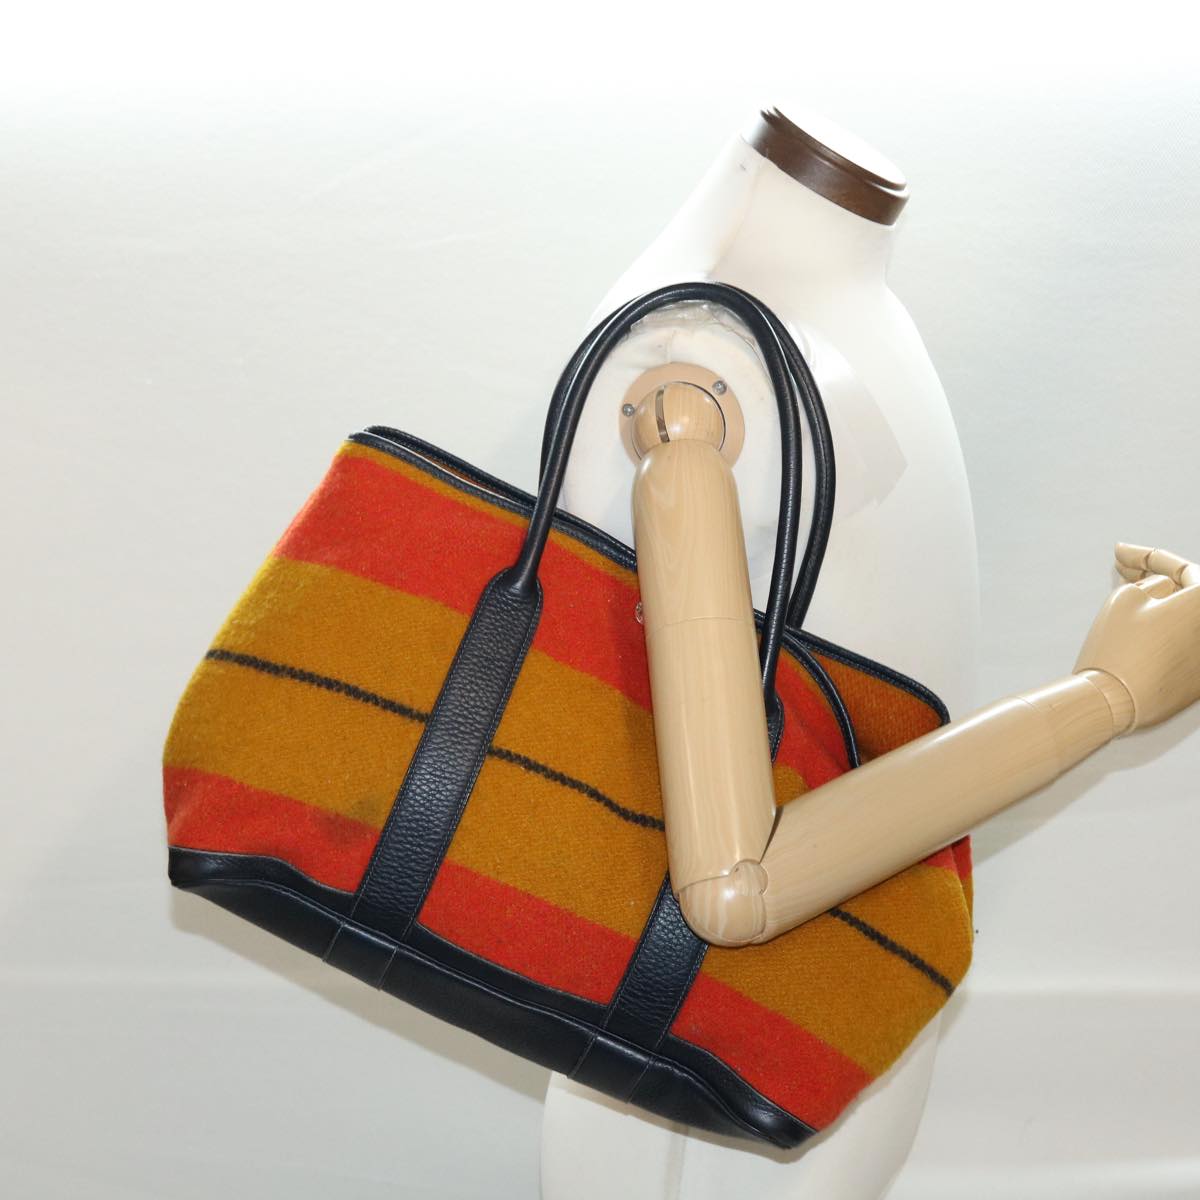 HERMES Rocabal Garden Party PM Tote Bag Wool Yellow Orange Auth 40309